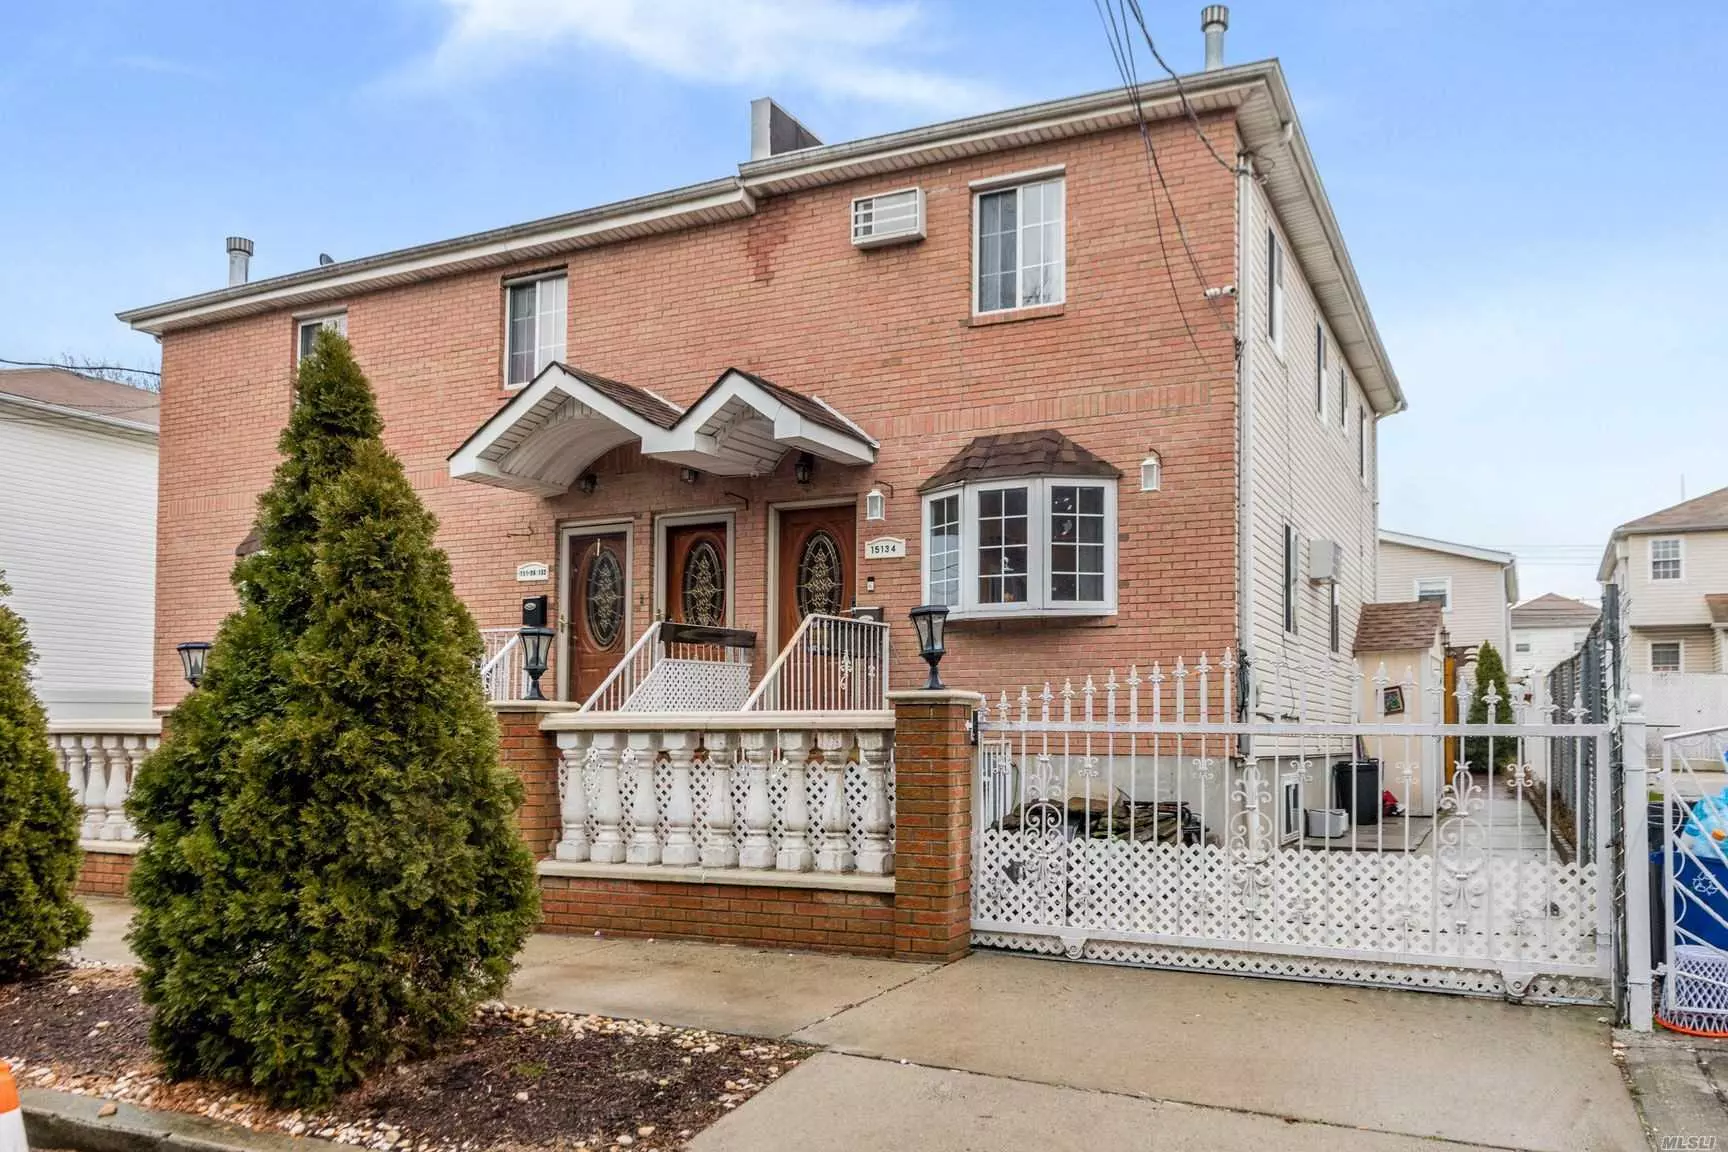 Well Maintained 12 Years Young, Semi-Detached Home. Located On A Quiet Cul-De-Sac. Granite Kitchen, Updated Bathrooms&Wood Floors Throughout. Full Finished Basement w/ Full Bathroom and Walk Out OSE&rsquo;s. Entertainers Backyard and Private Driveway. MUST See This Updated Home, Also Good For Investors!